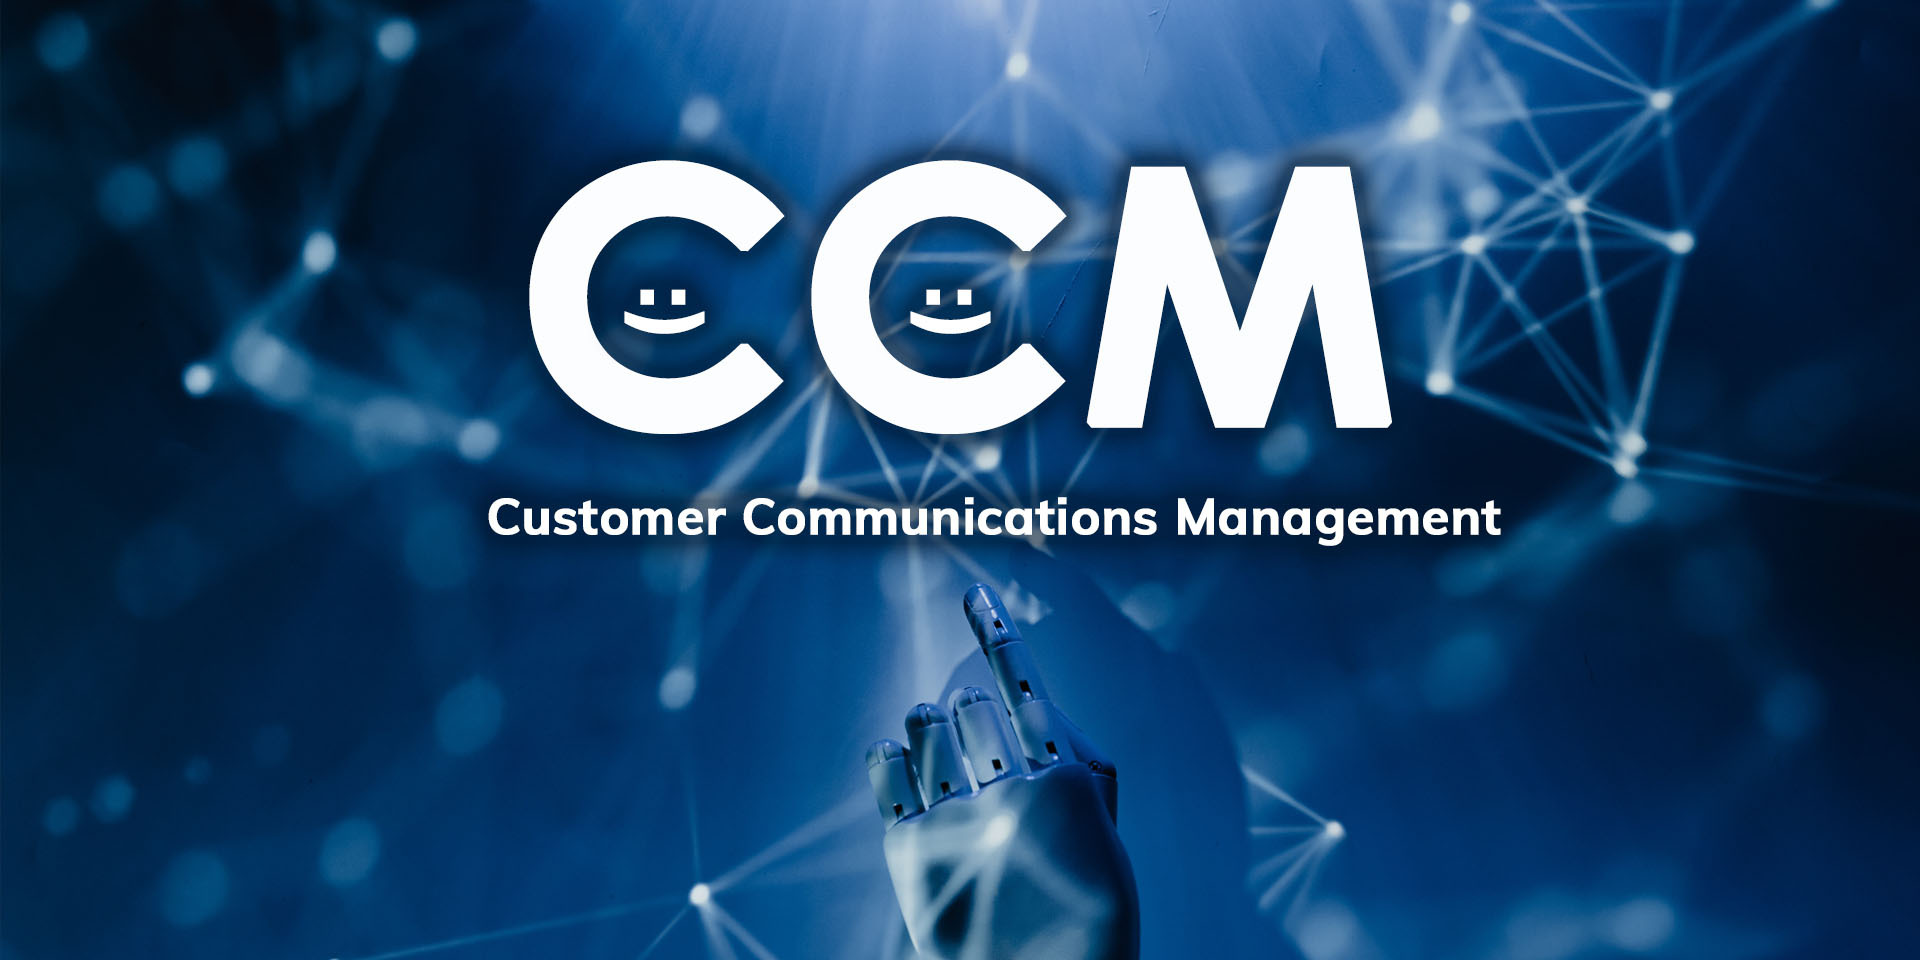 CCM platforms can help companies stand out from the crowd of competitors and deliver the highest quality customer experience